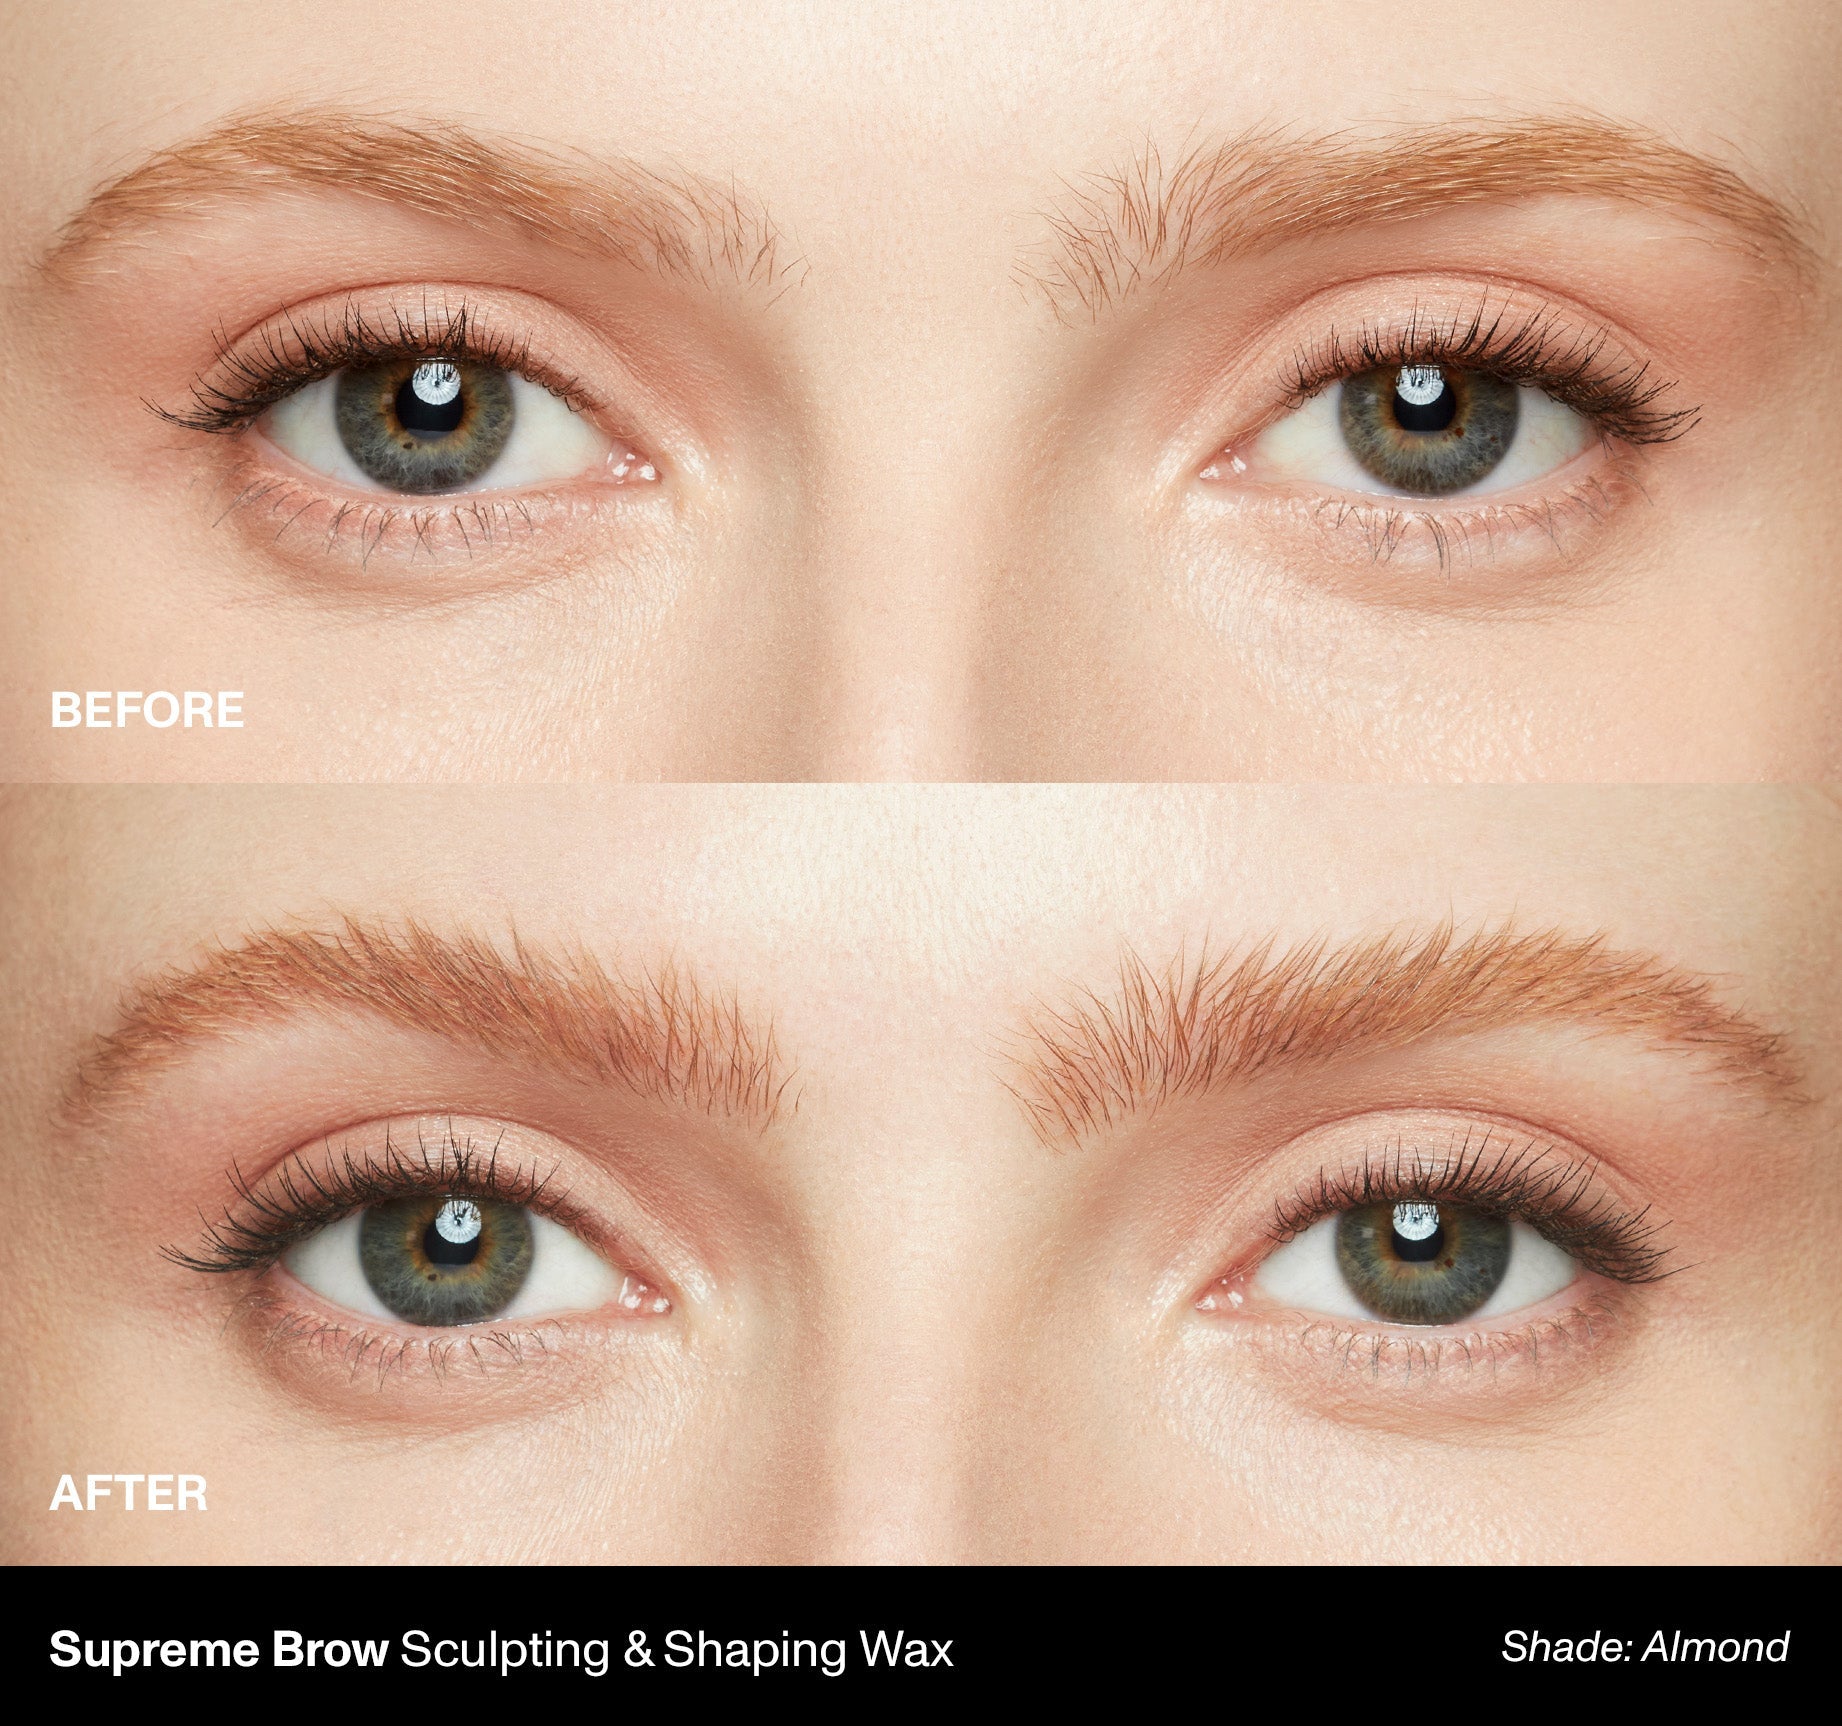 Supreme Brow Sculpting And Shaping Wax - Almond - Image 5